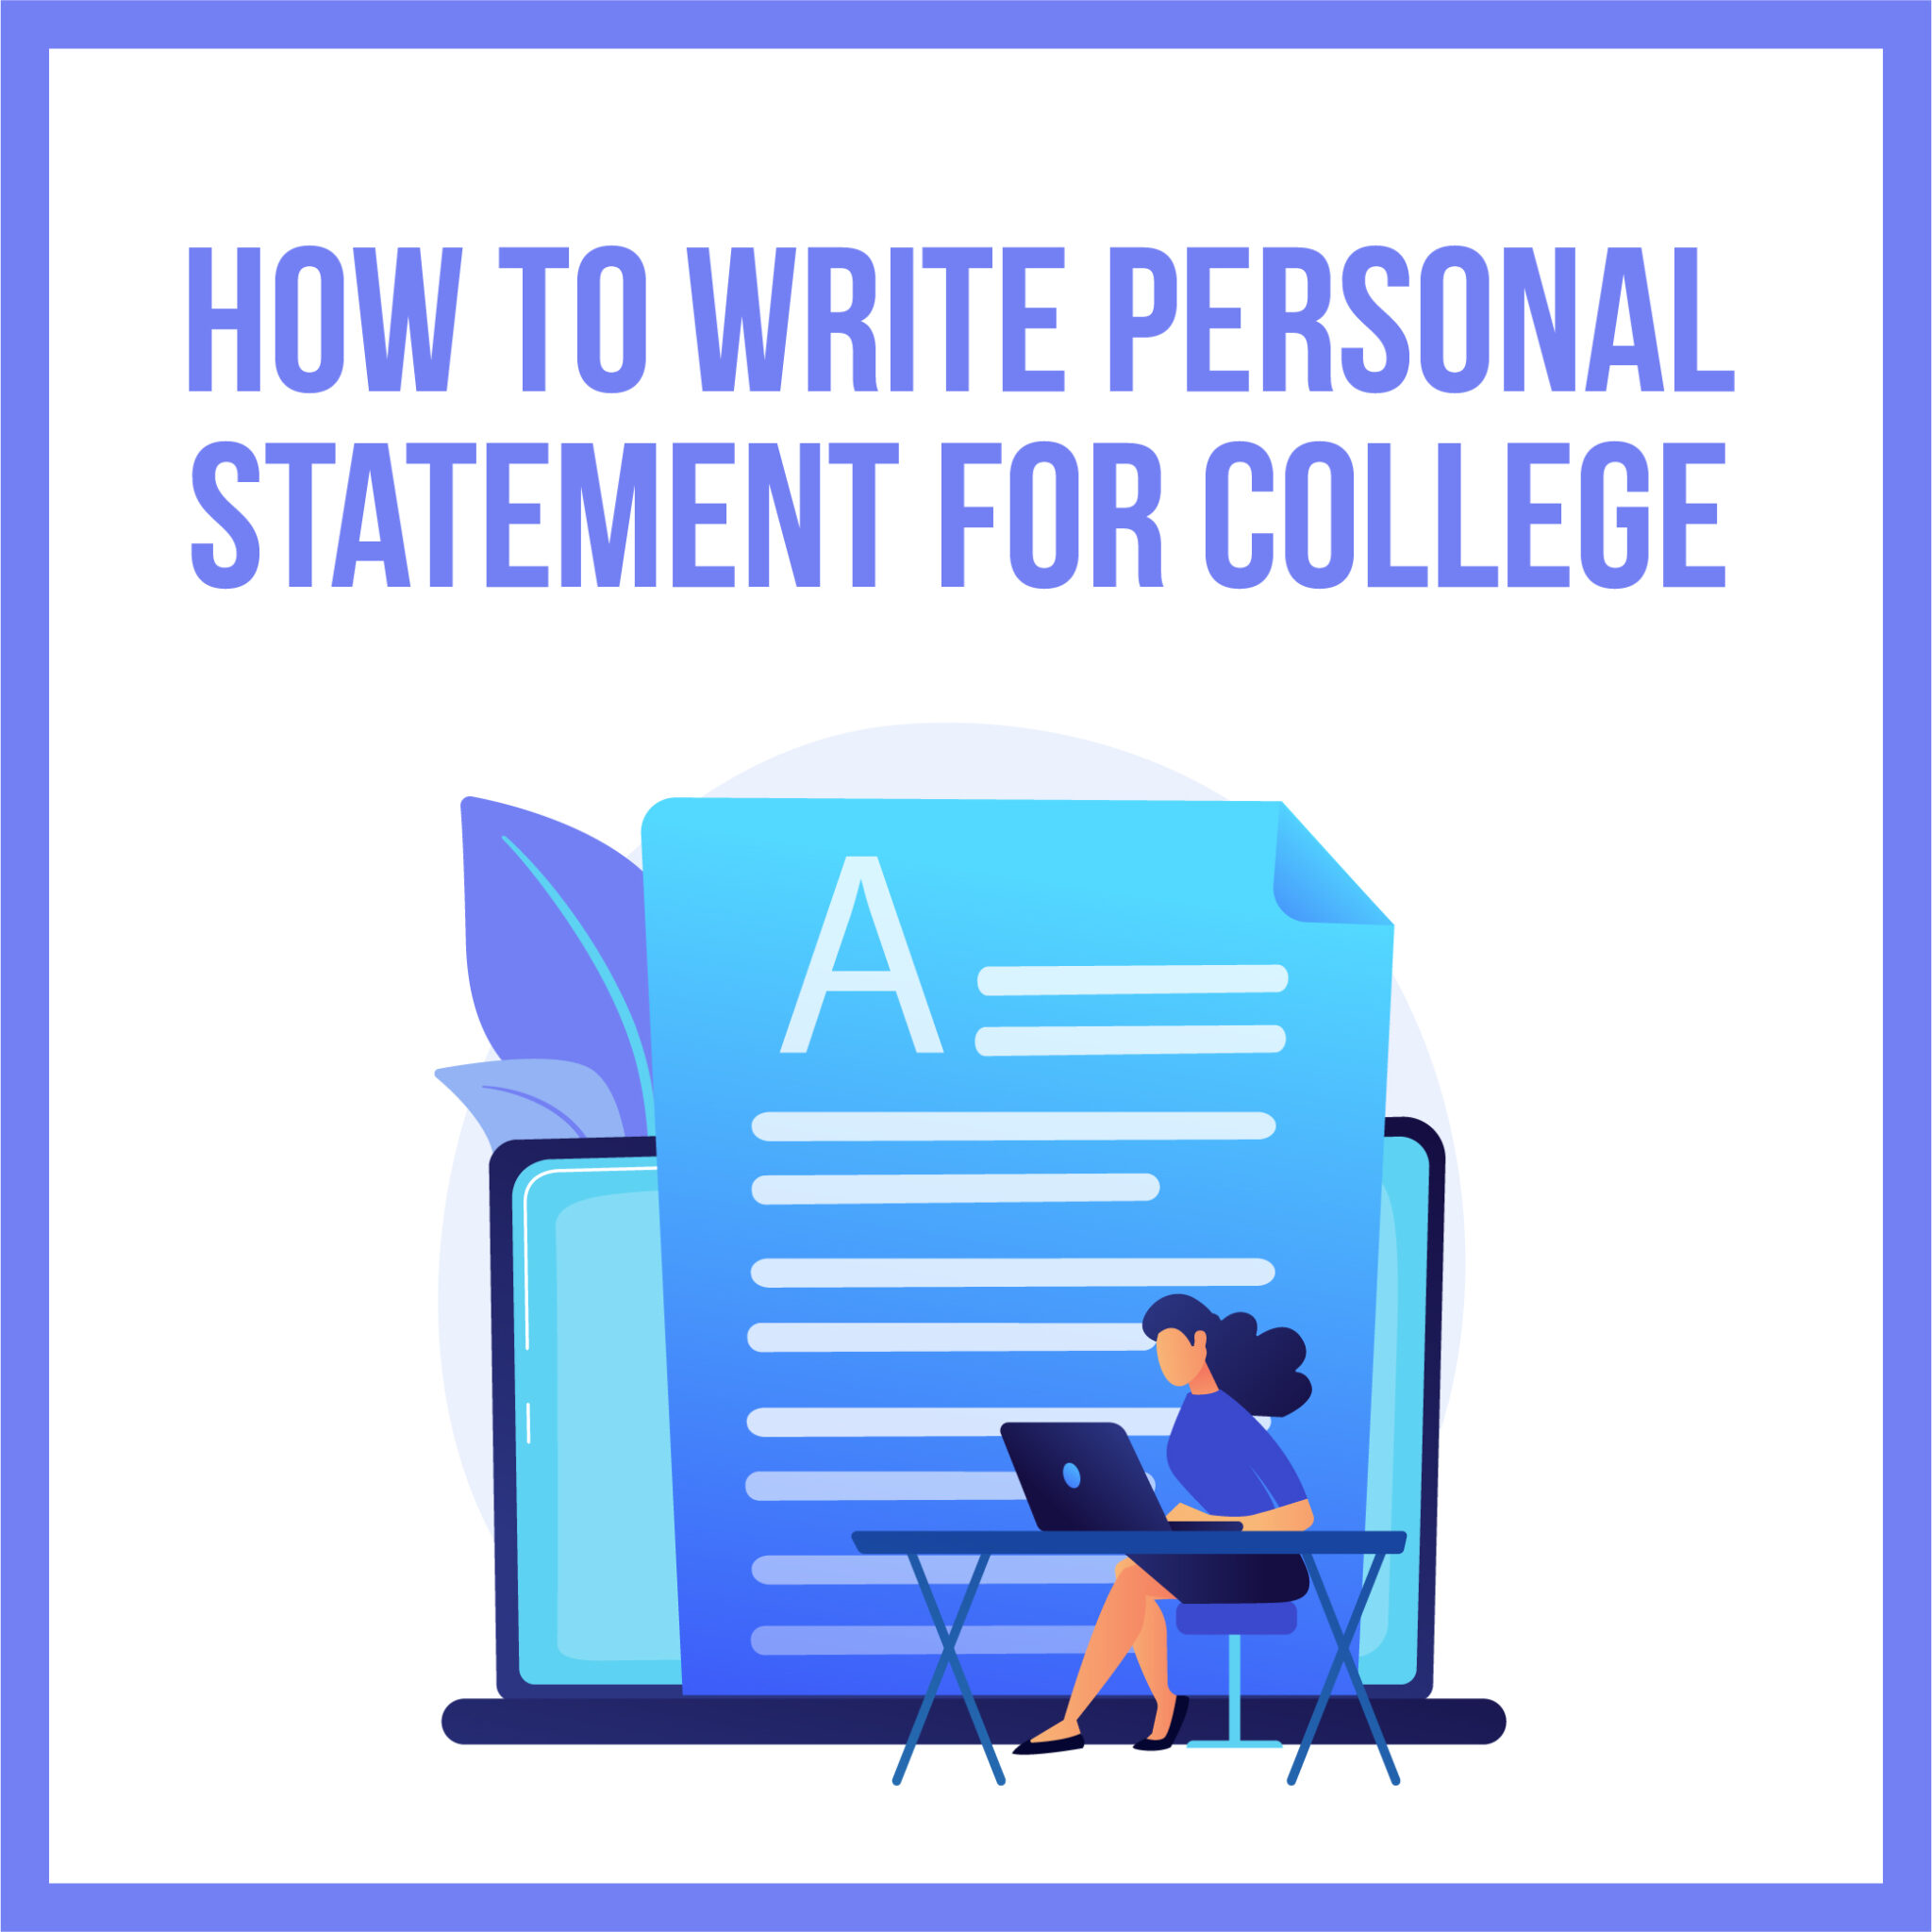 to write a personal statement for college